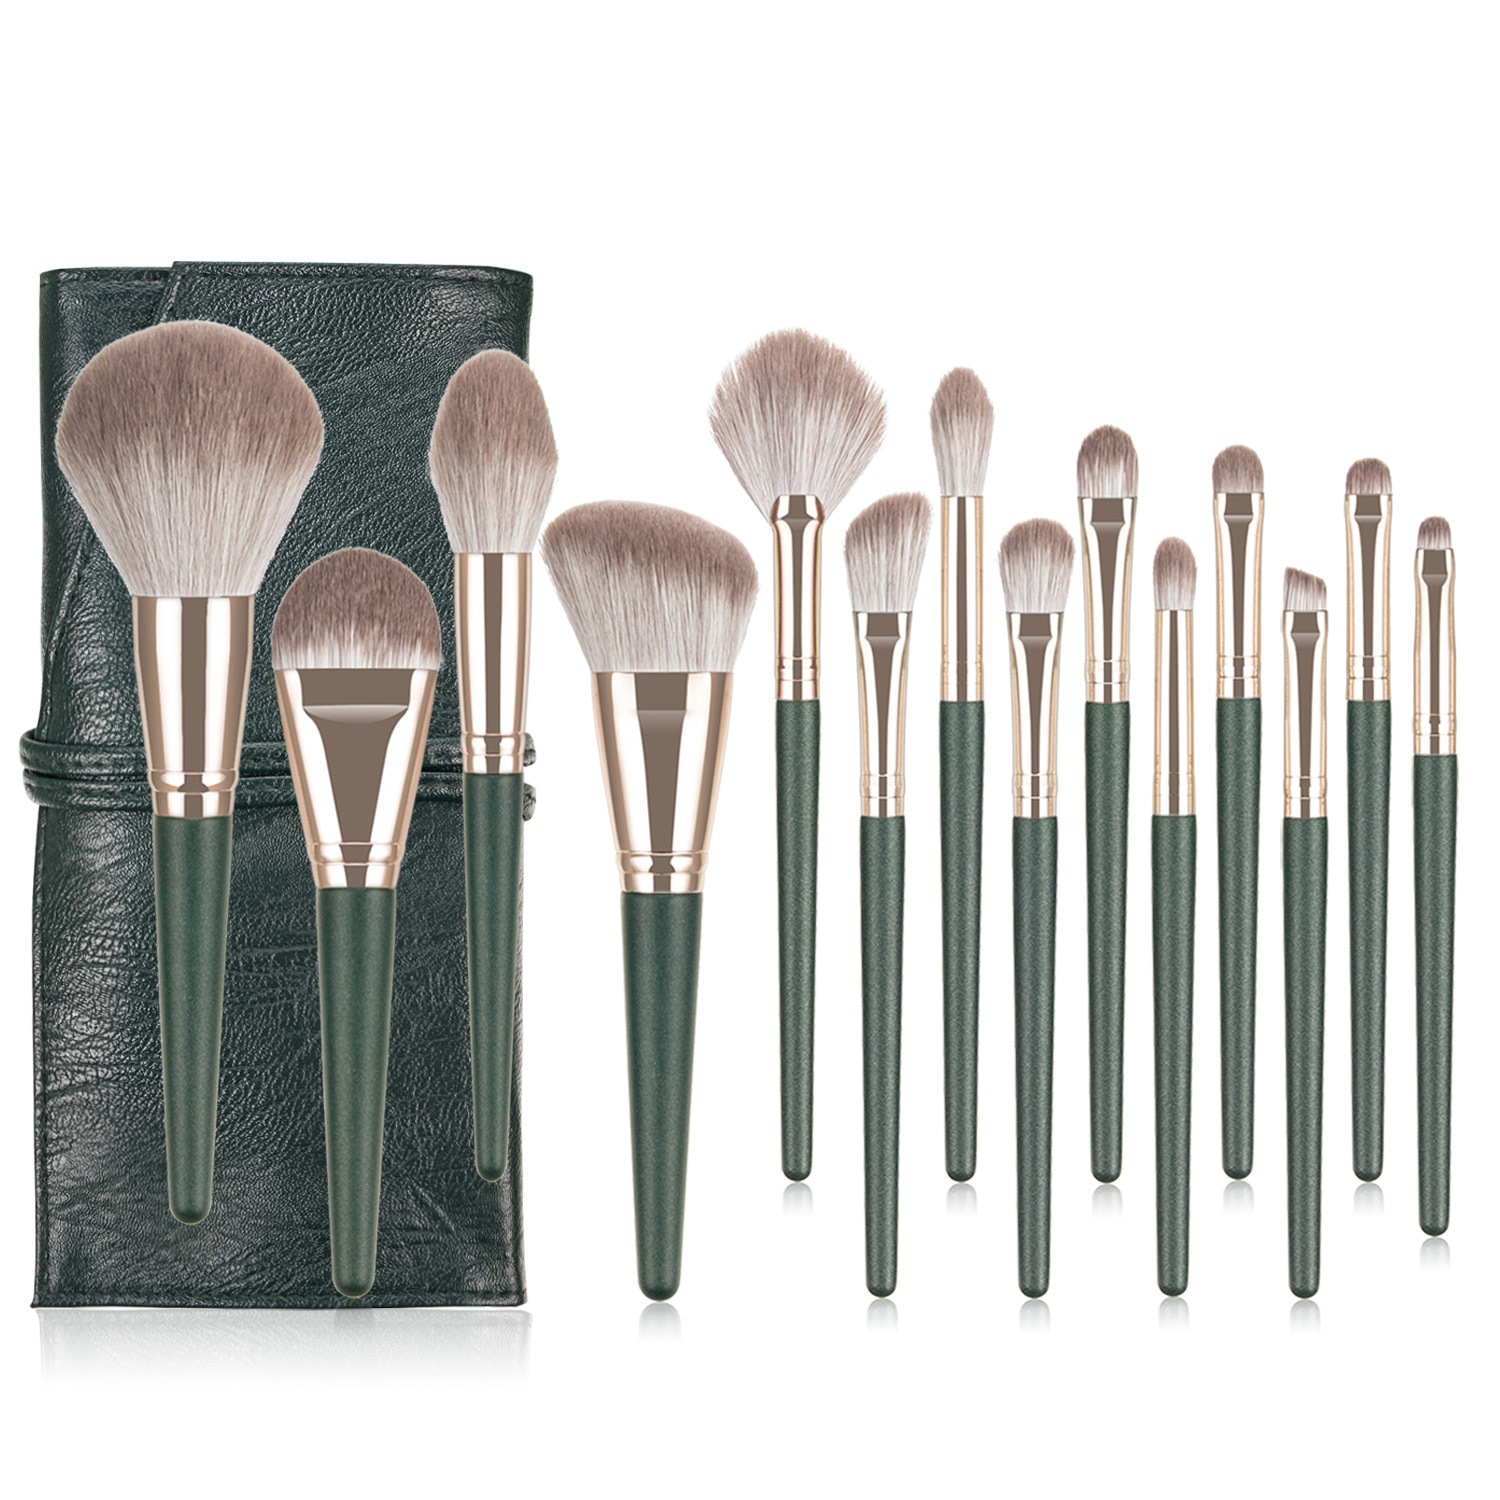 How to buy an Eco Friendly makeup brush